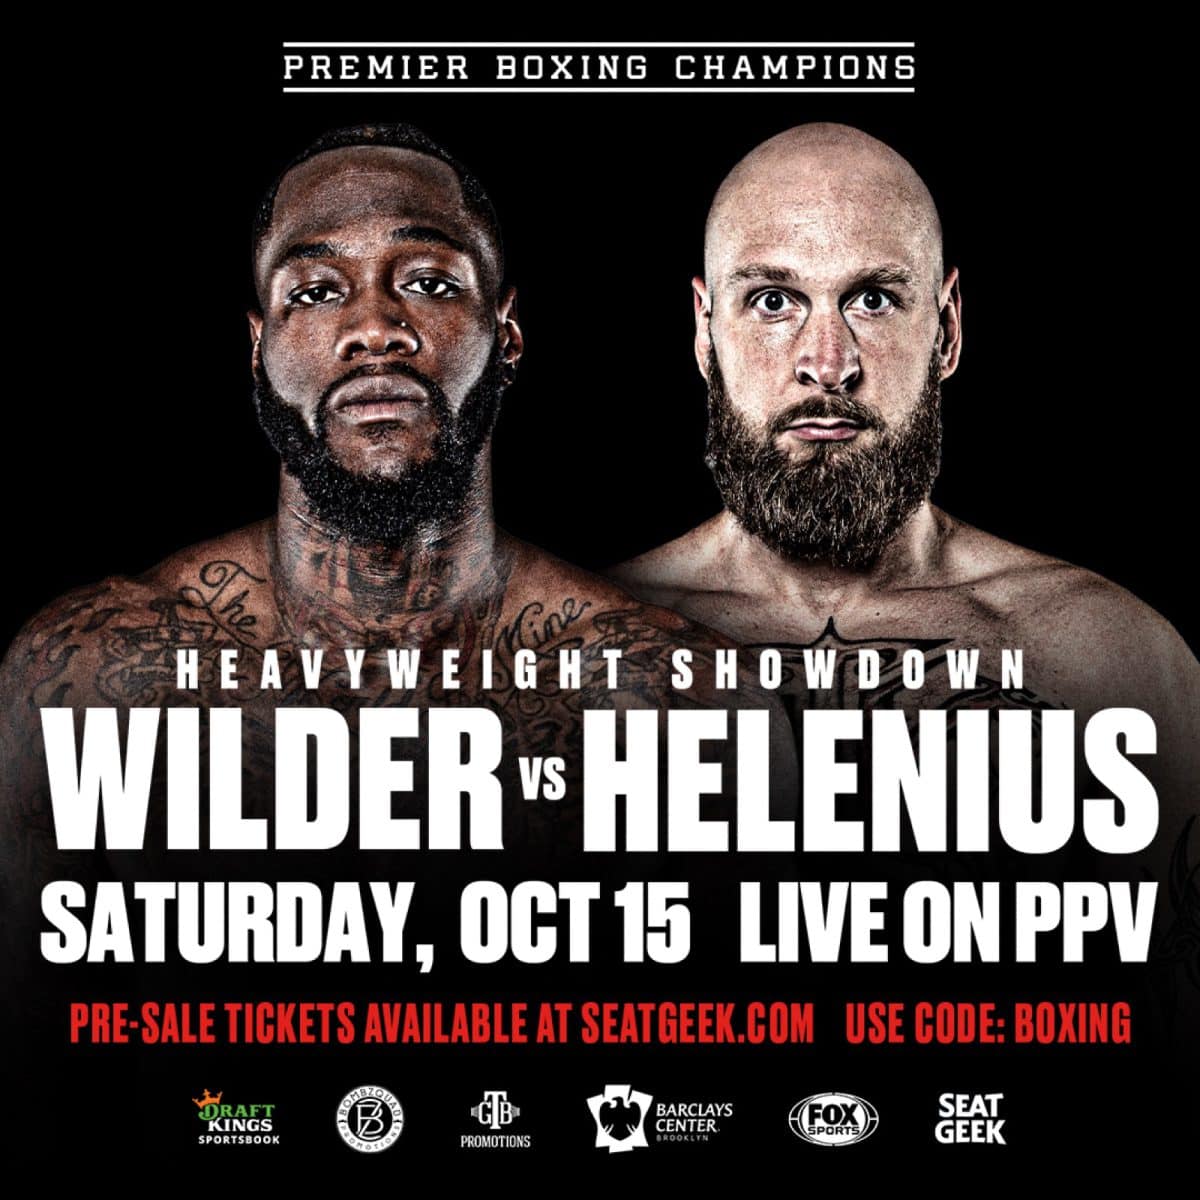 Image: Robert Helenius expects to defeat Deontay Wilder on Oct.15th